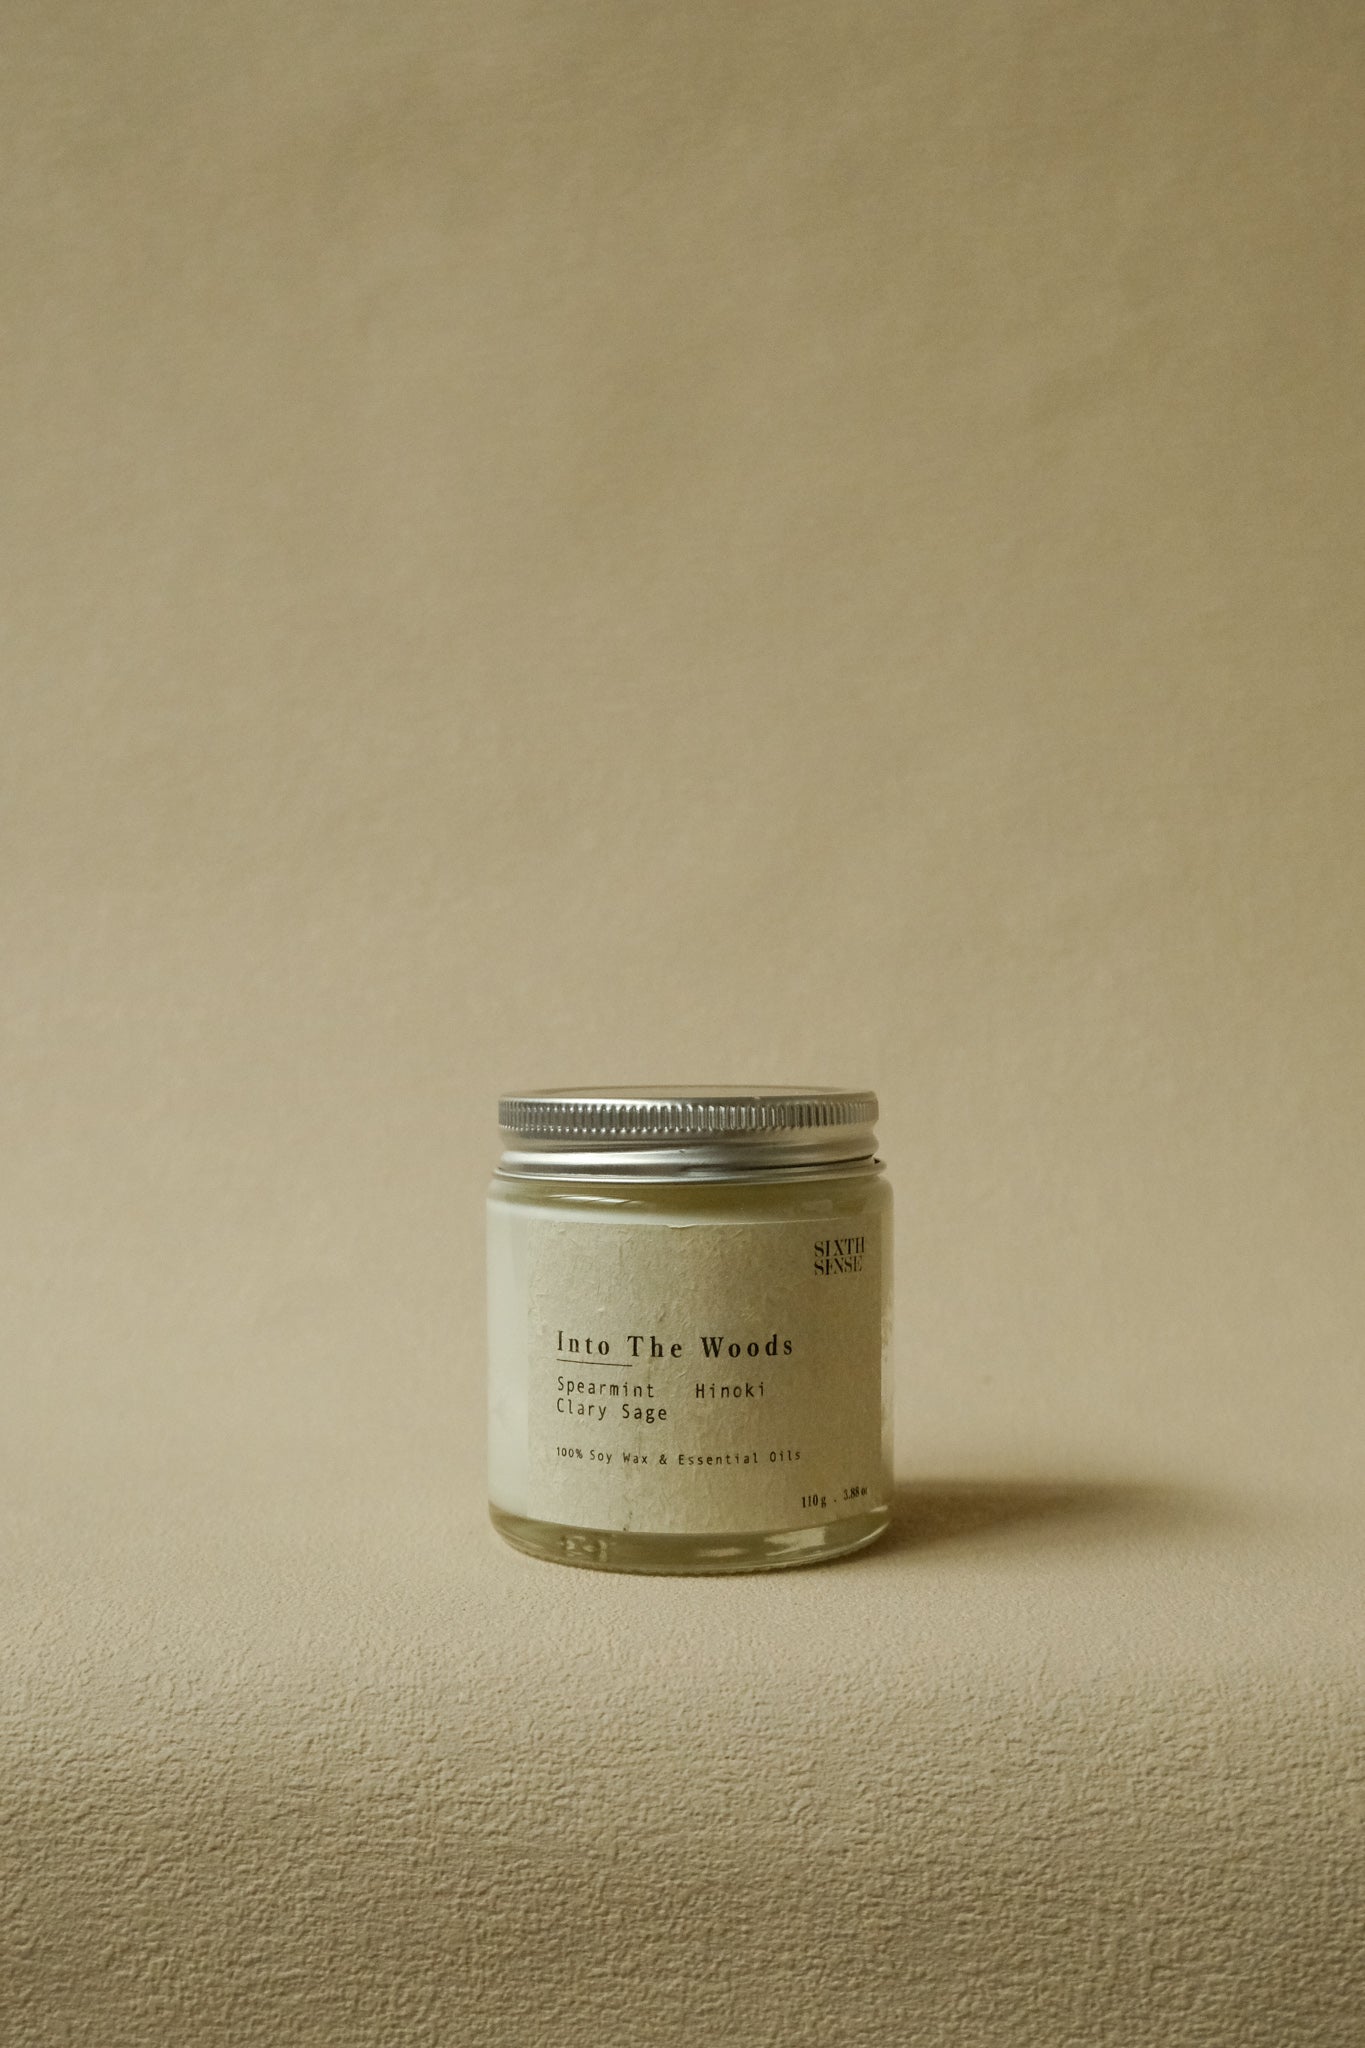 Into The Woods Aromatic Soy Wax Candle